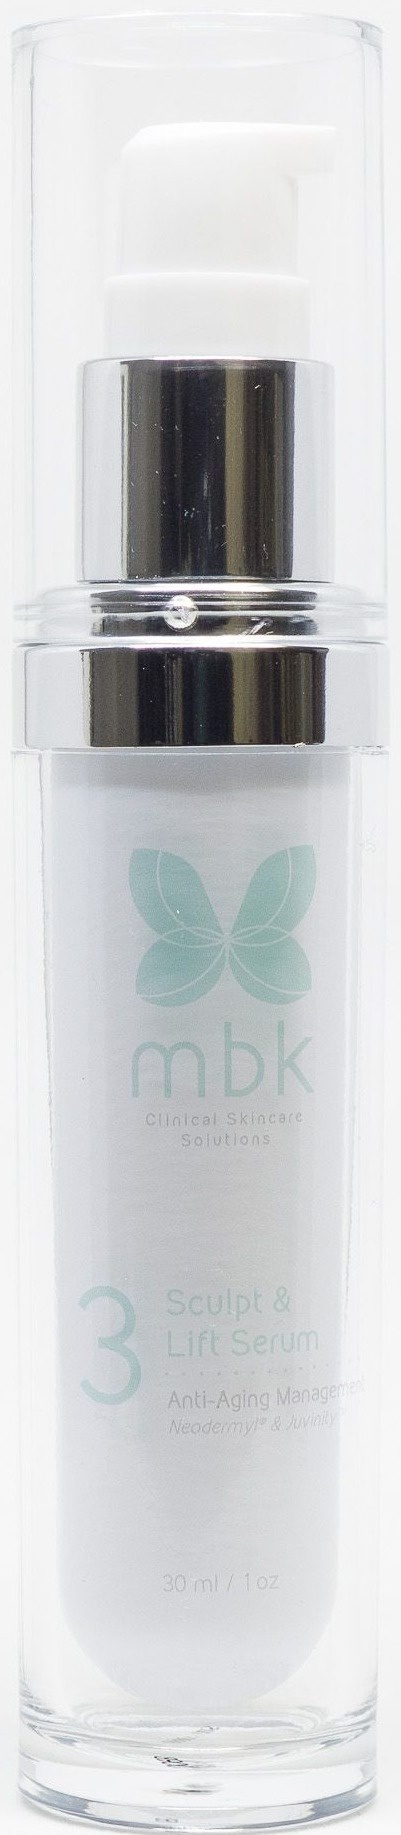 MBK Clinical Skincare Solutions Adversenescence Serum